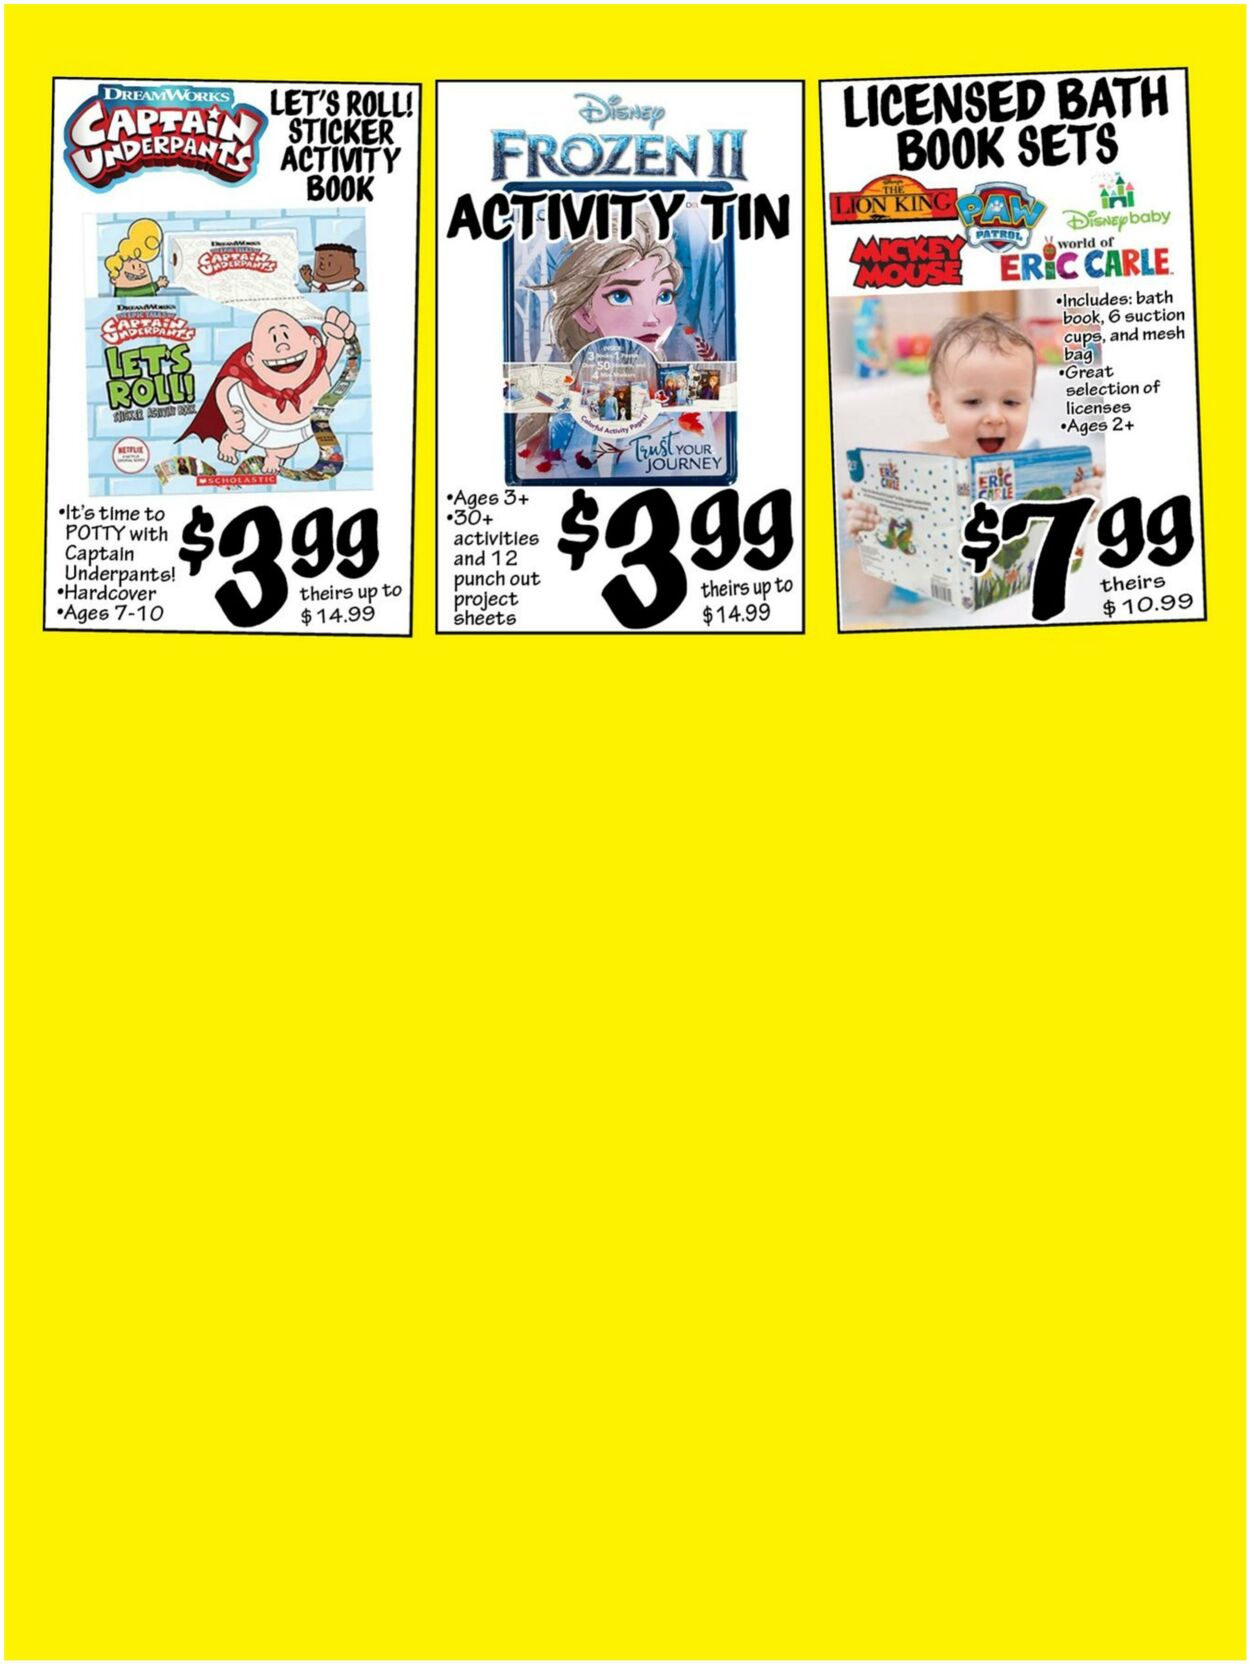 Weekly ad Ollie's 11/17/2022 - 11/21/2022